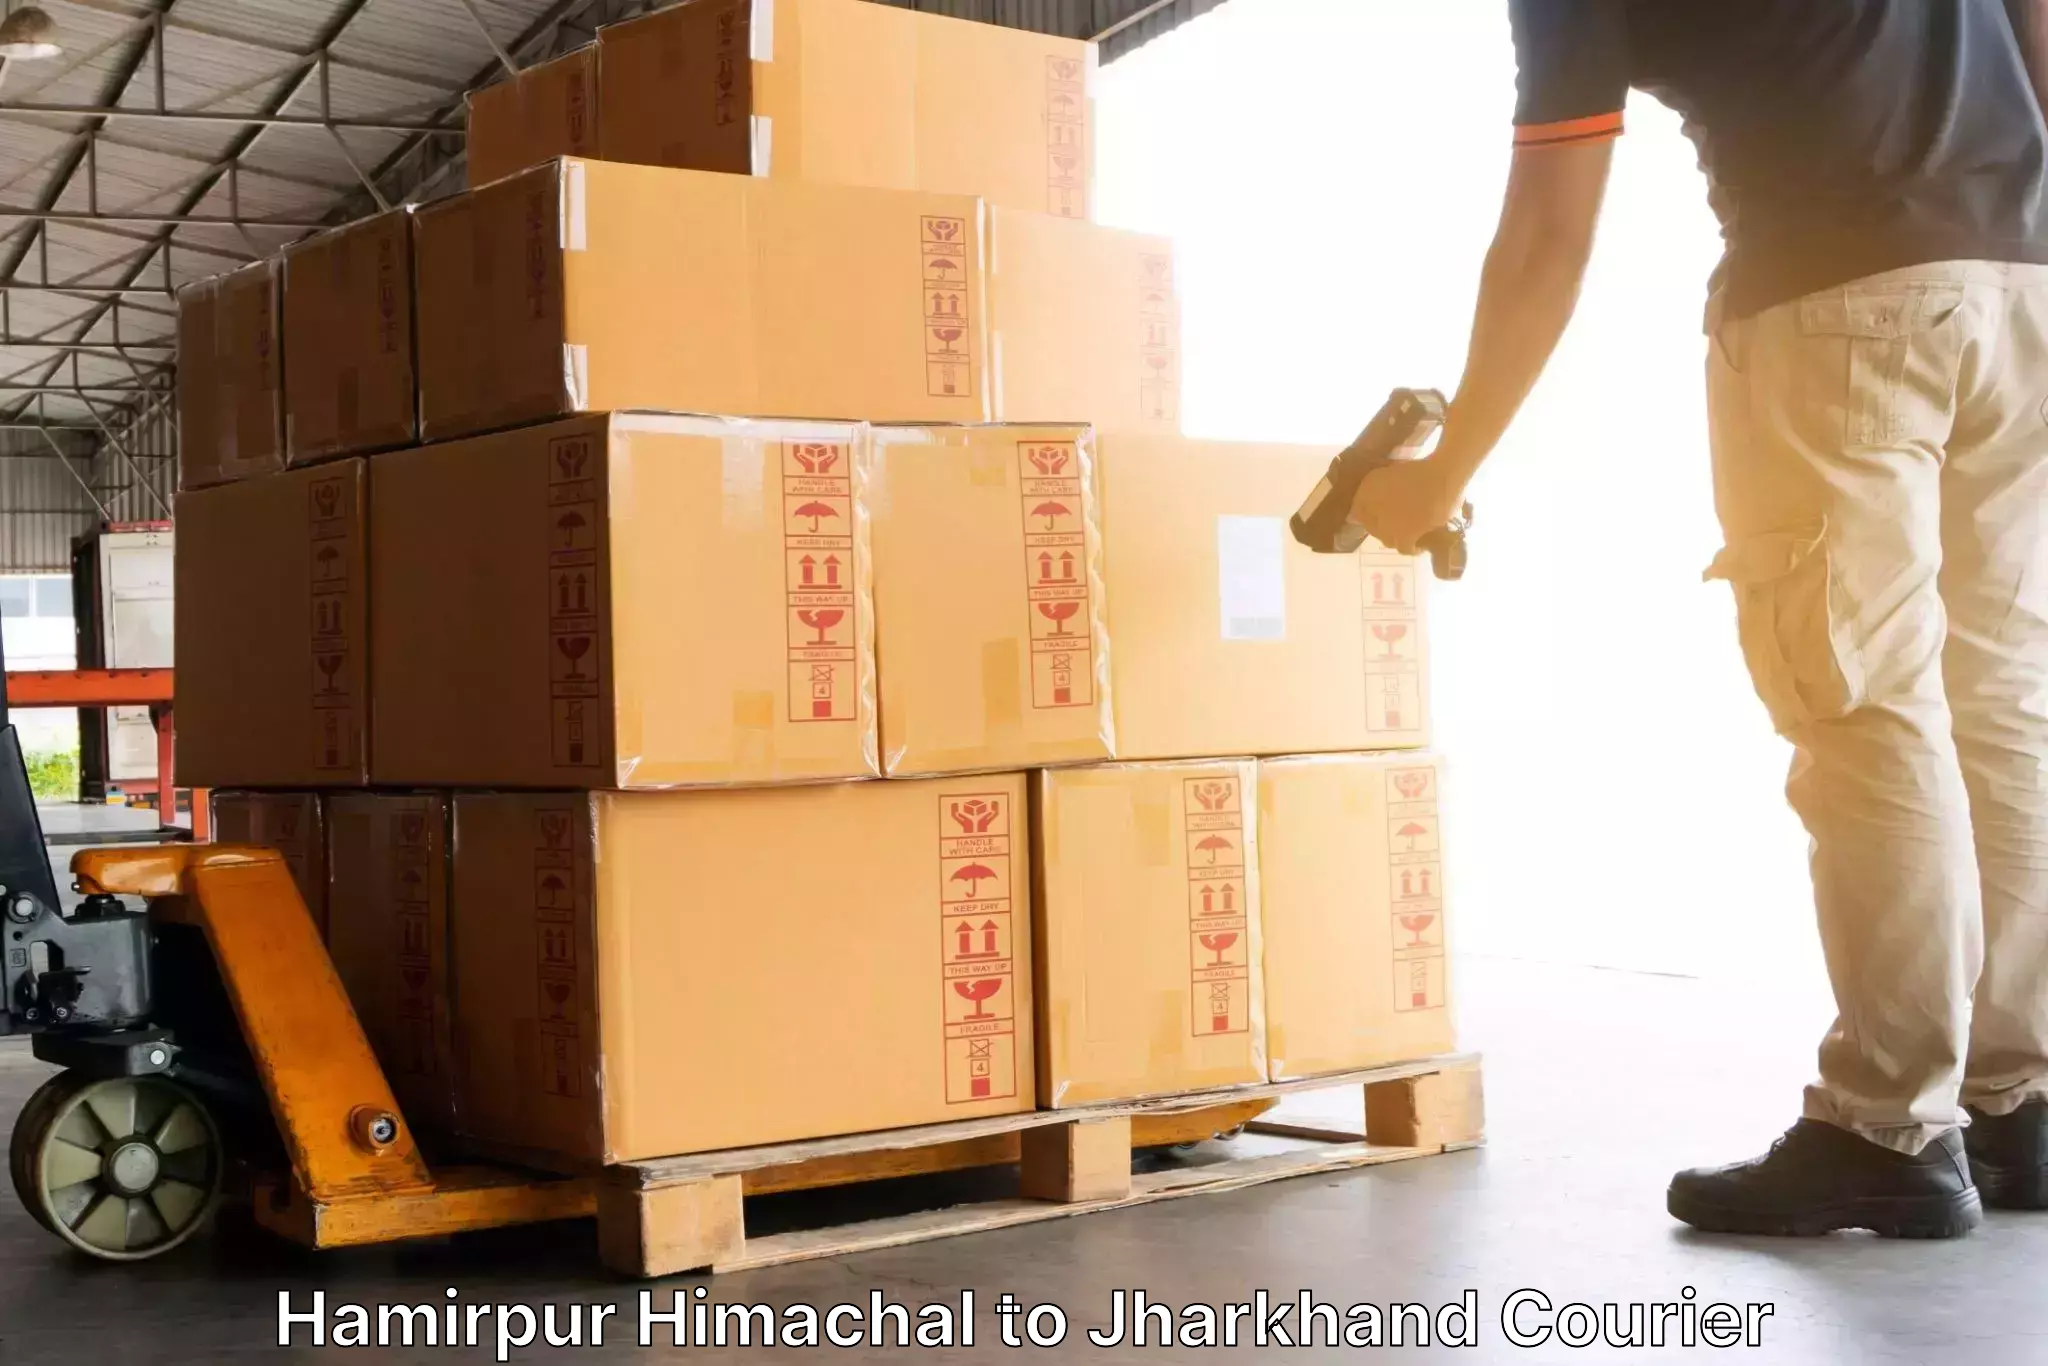 Express delivery capabilities Hamirpur Himachal to Jharkhand